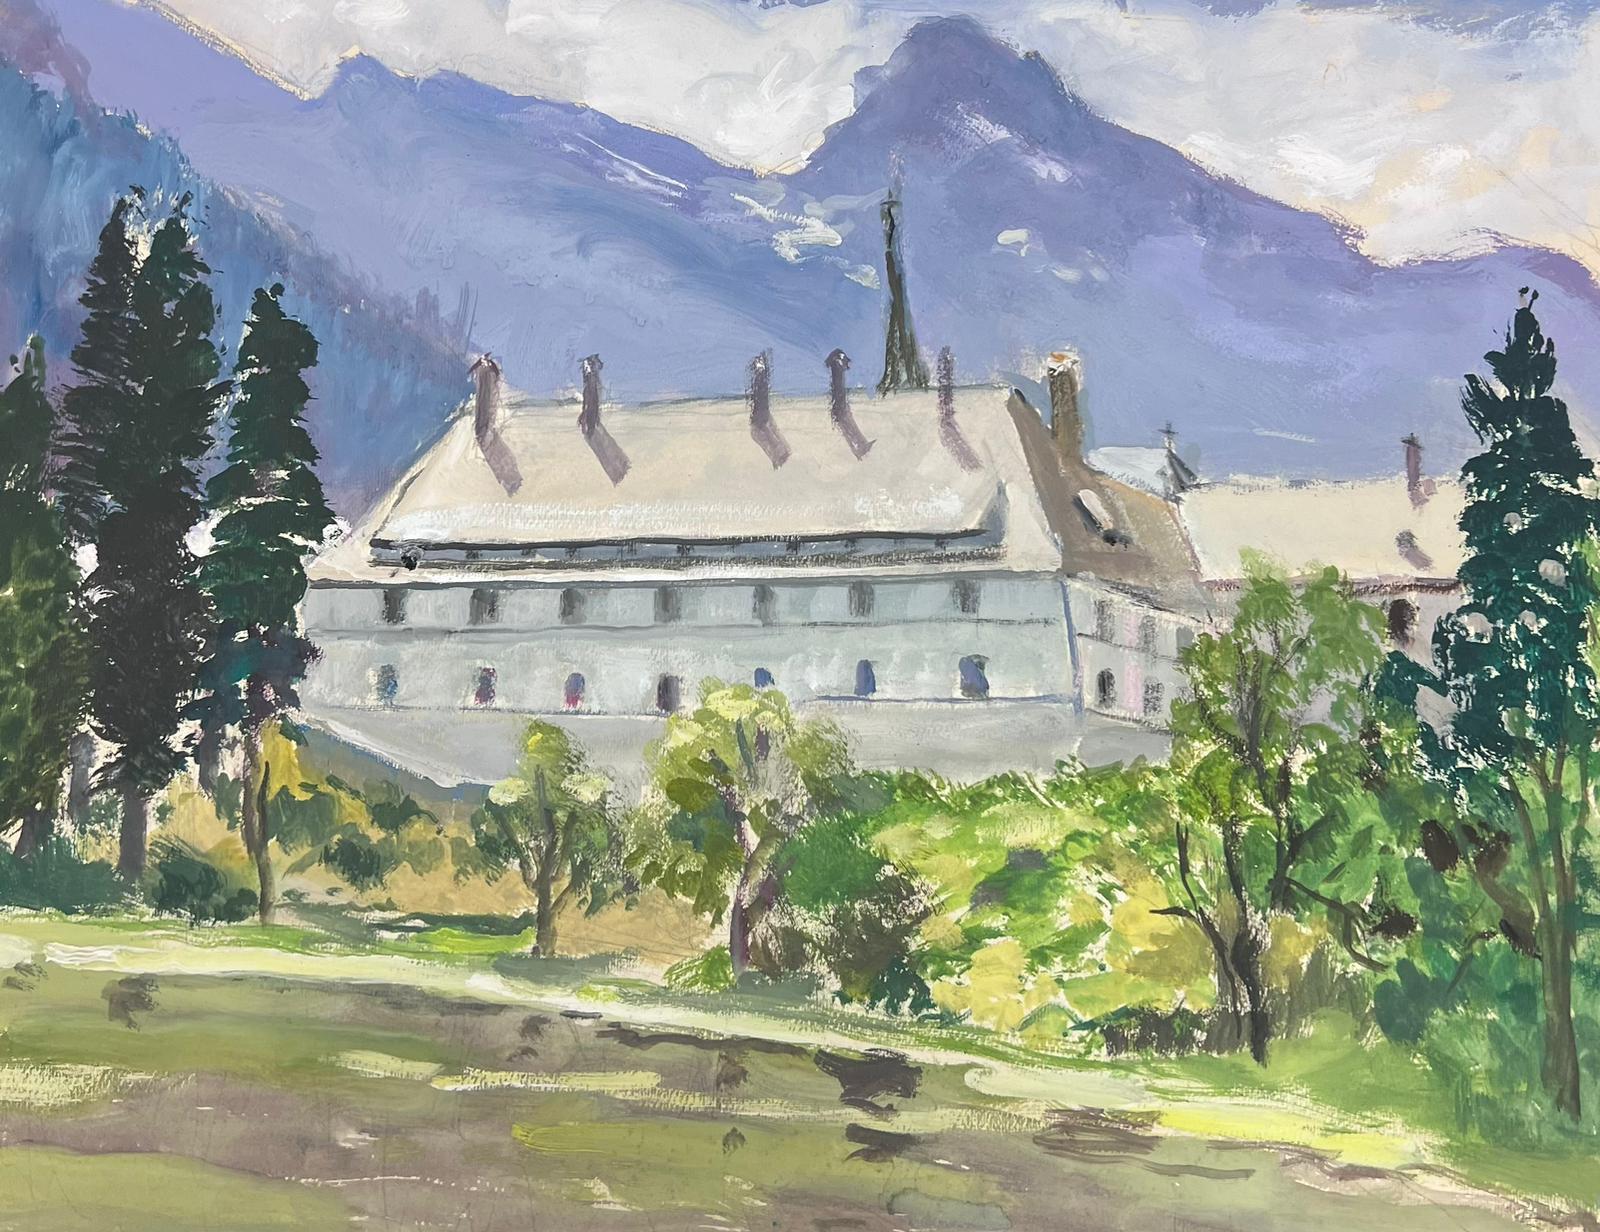 French Landscape
by Louise Alix (French, 1888-1980) *see notes below
provenance stamp to the back 
gouache painting on artist paper, unframed
measures: 12.75 high by 16.5 inches wide
condition: overall very good and sound, a few scuffs and marks to